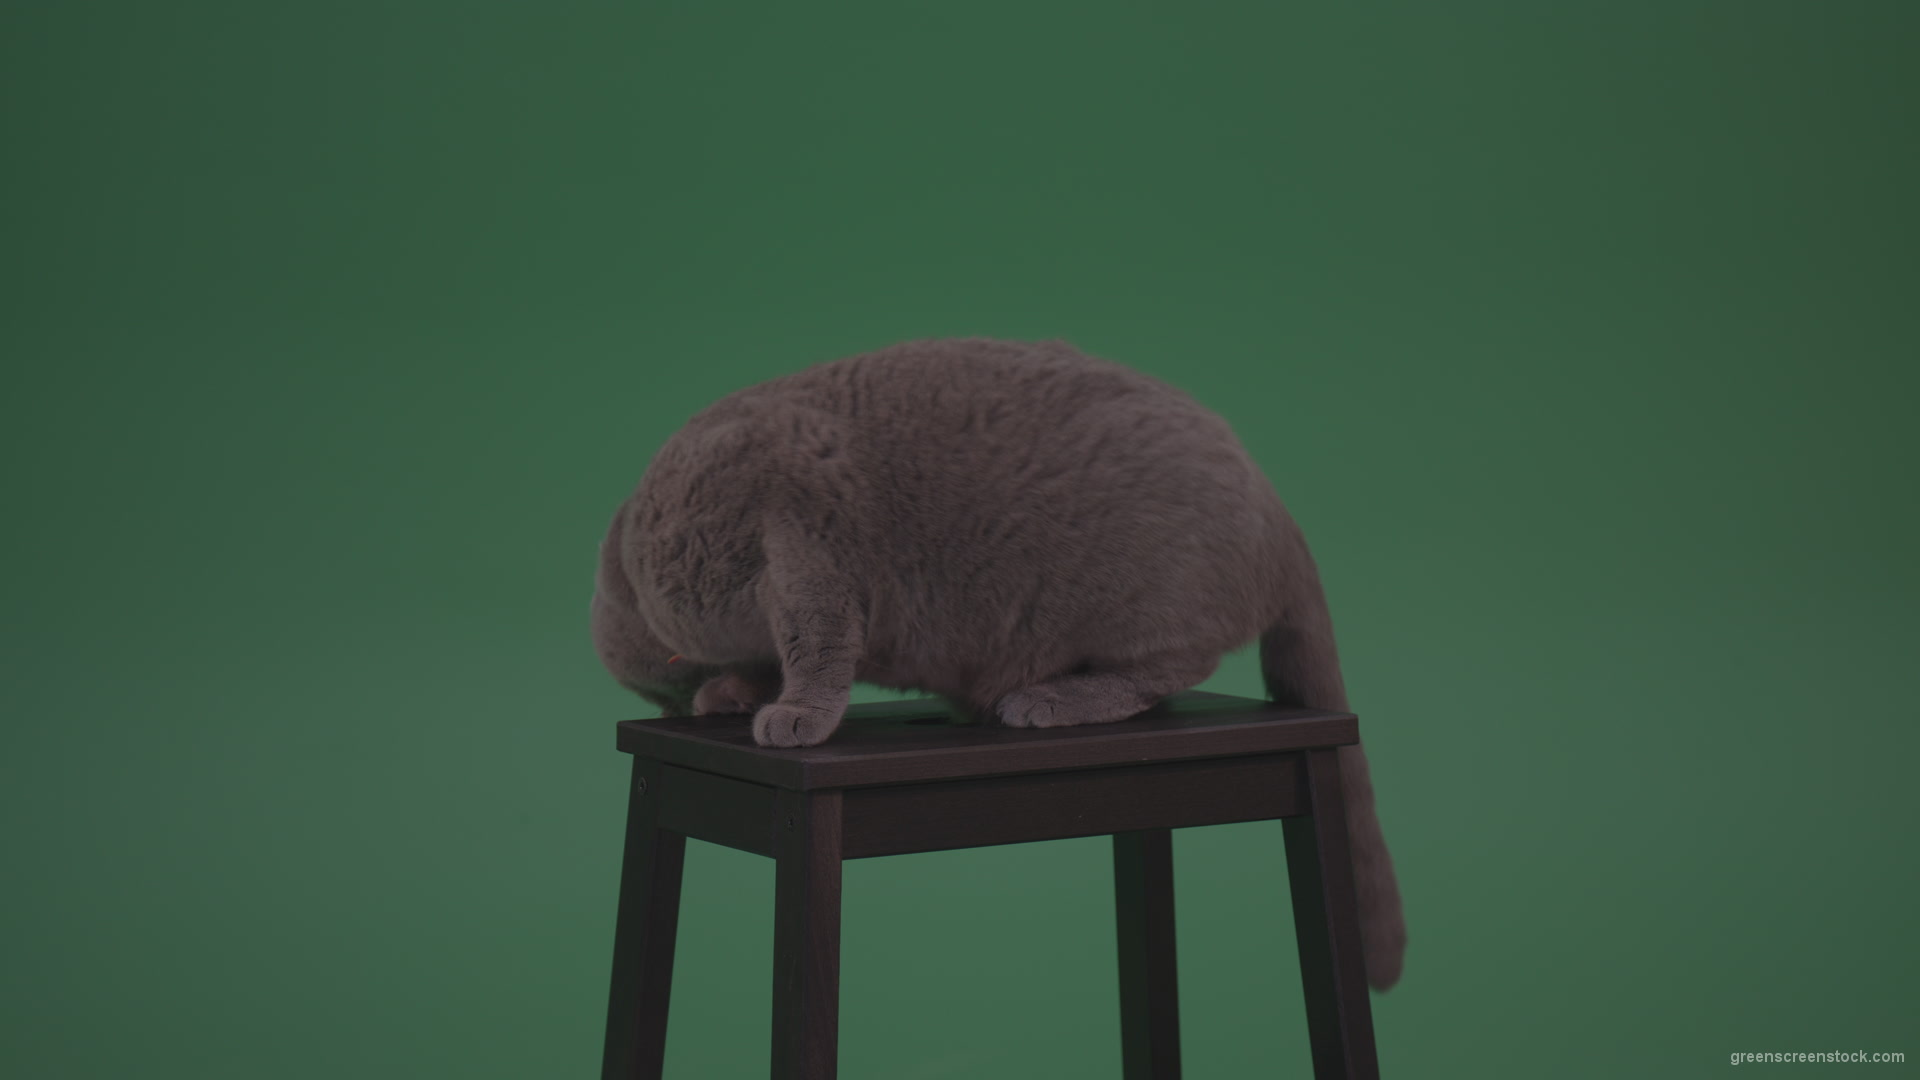 British-Gey-Cat-Sitting-On-Stool-Wagging-The-Tail-On_Green-Screen-Chroma-Key-Wall-Background_008 Green Screen Stock